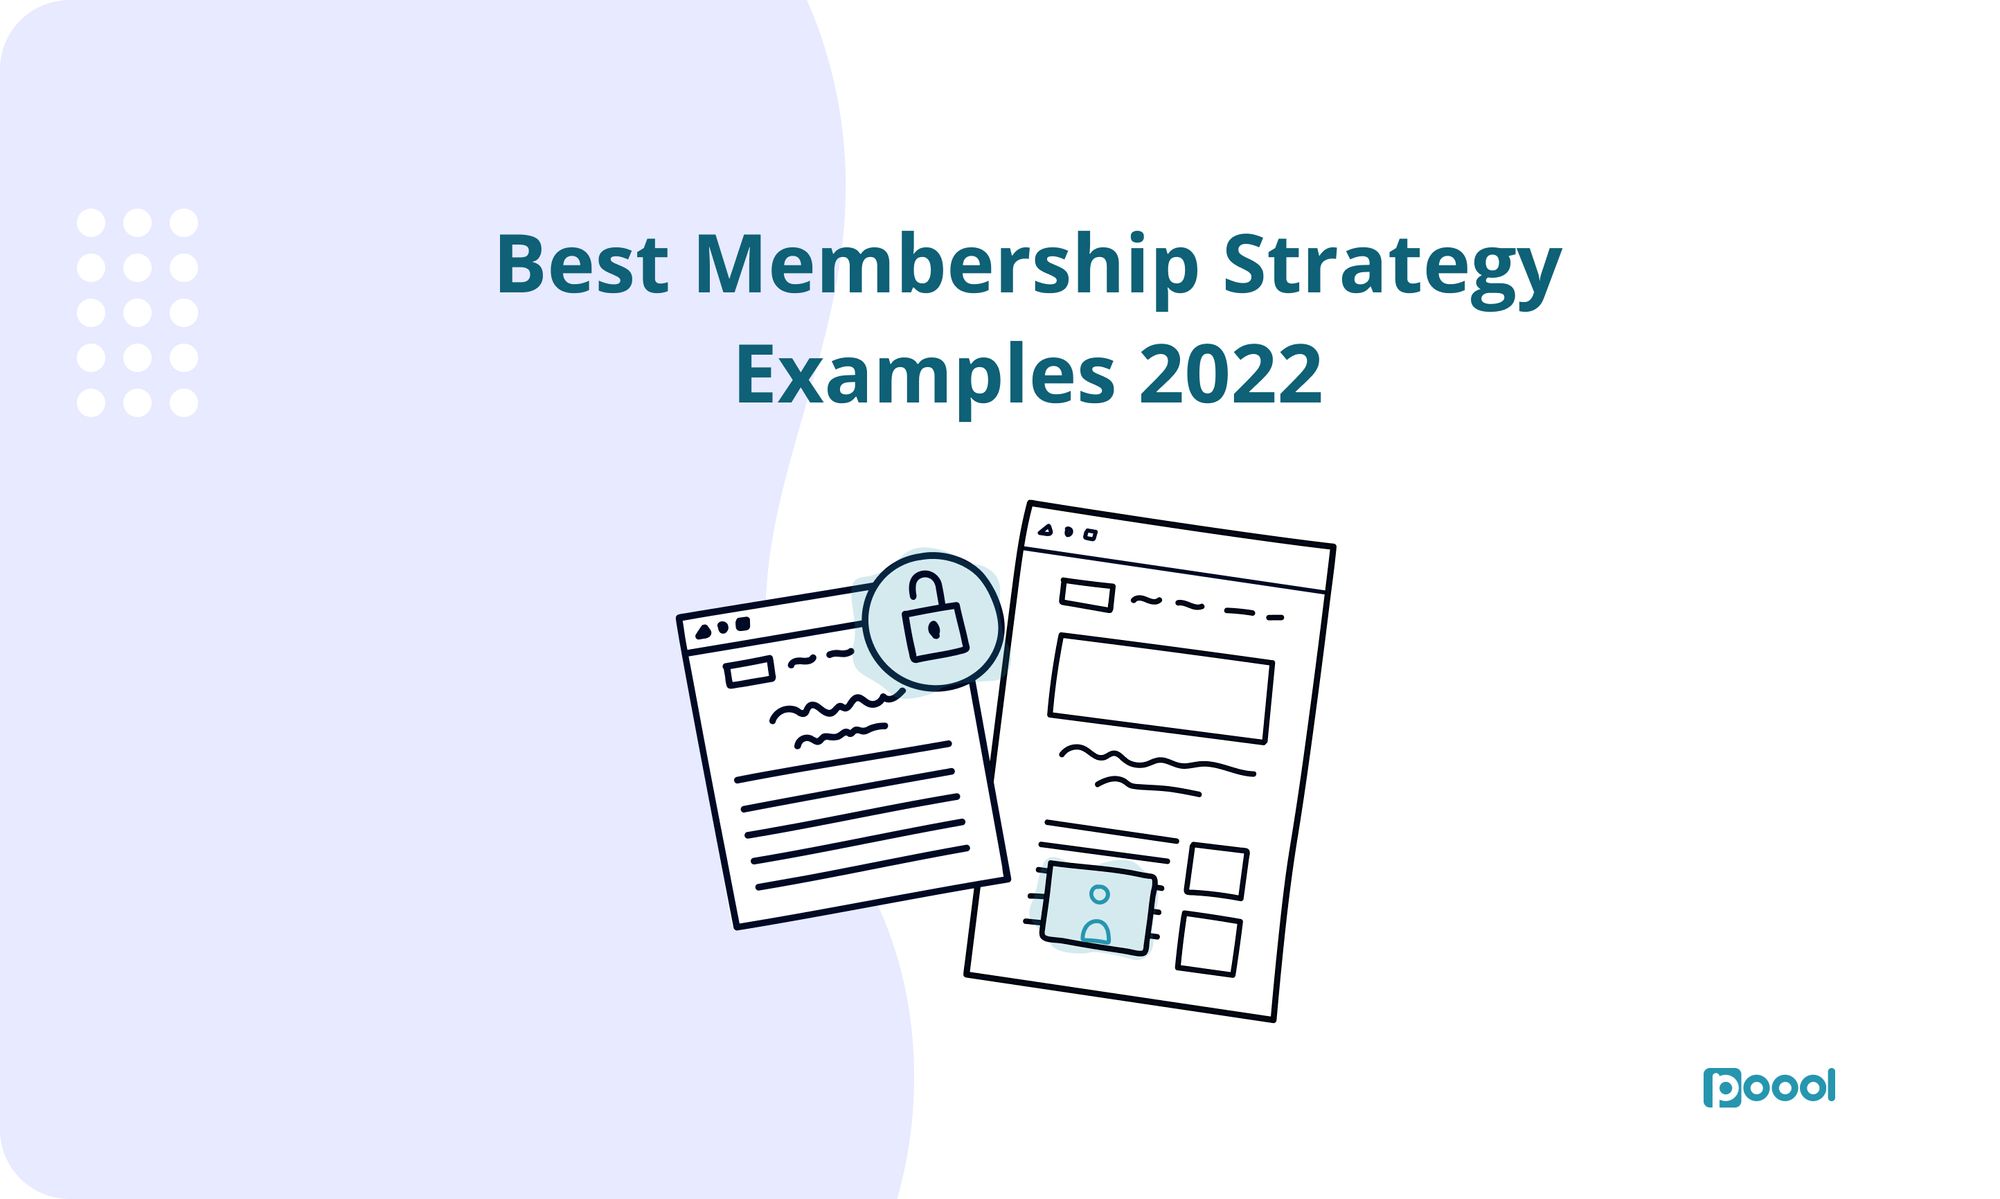 Best Membership Strategy Examples 2022